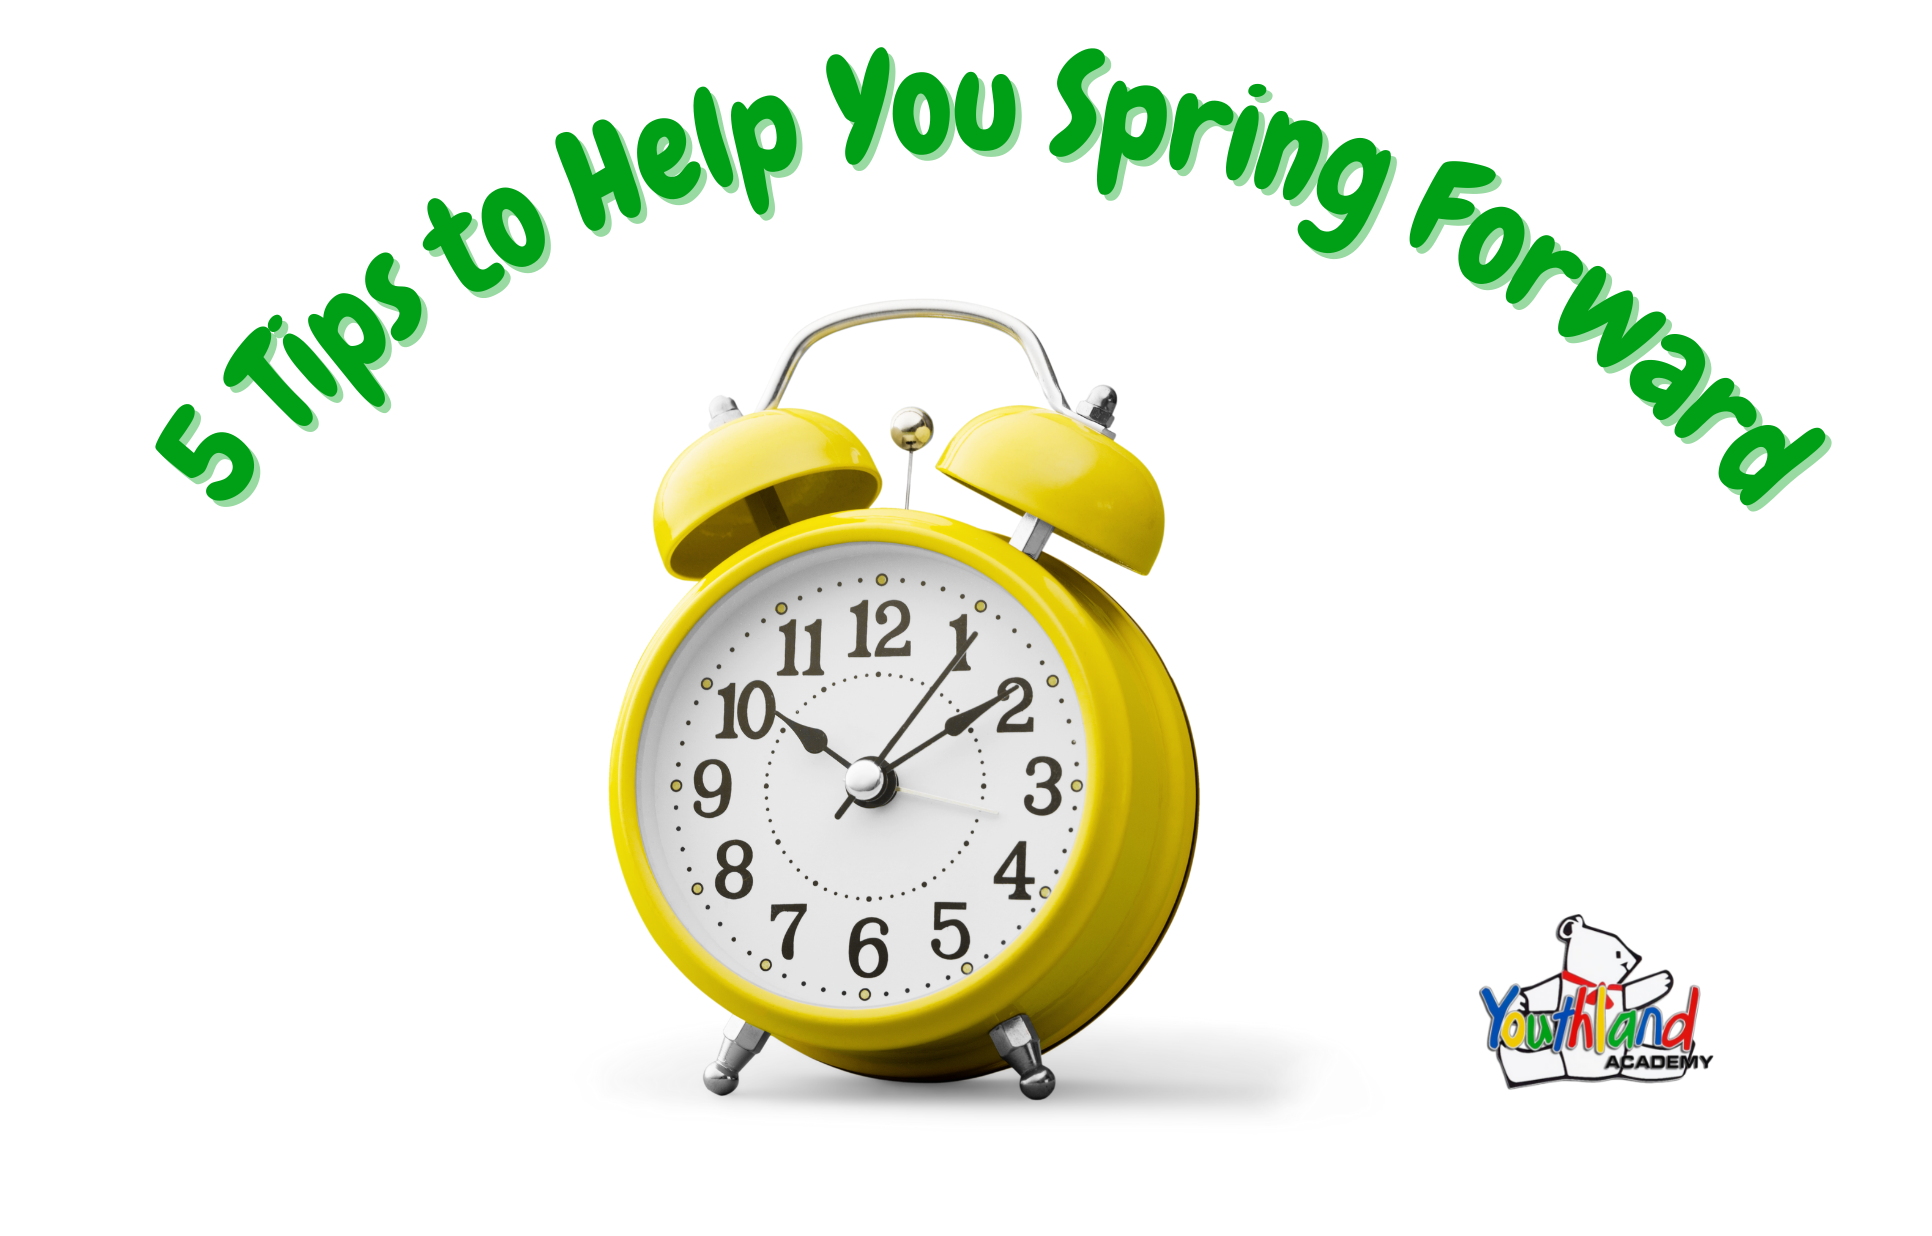 5 Tips to Help You Spring Forward